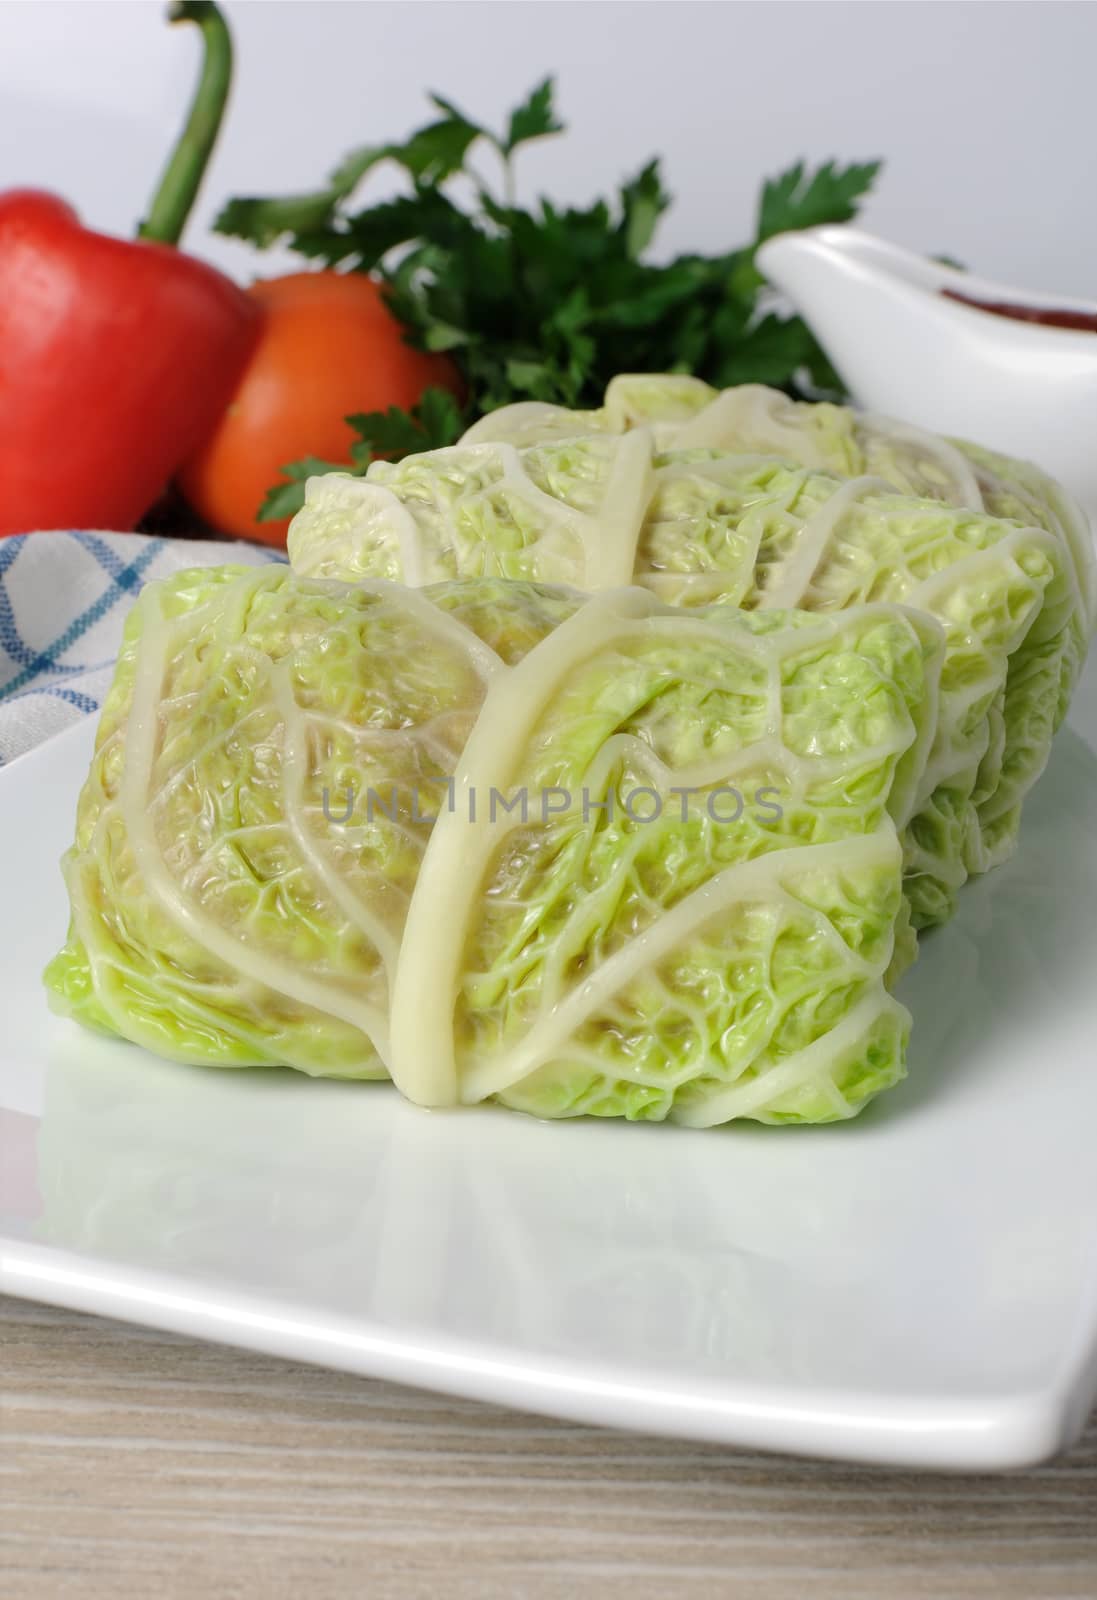 stuffed savoy cabbage by Apolonia